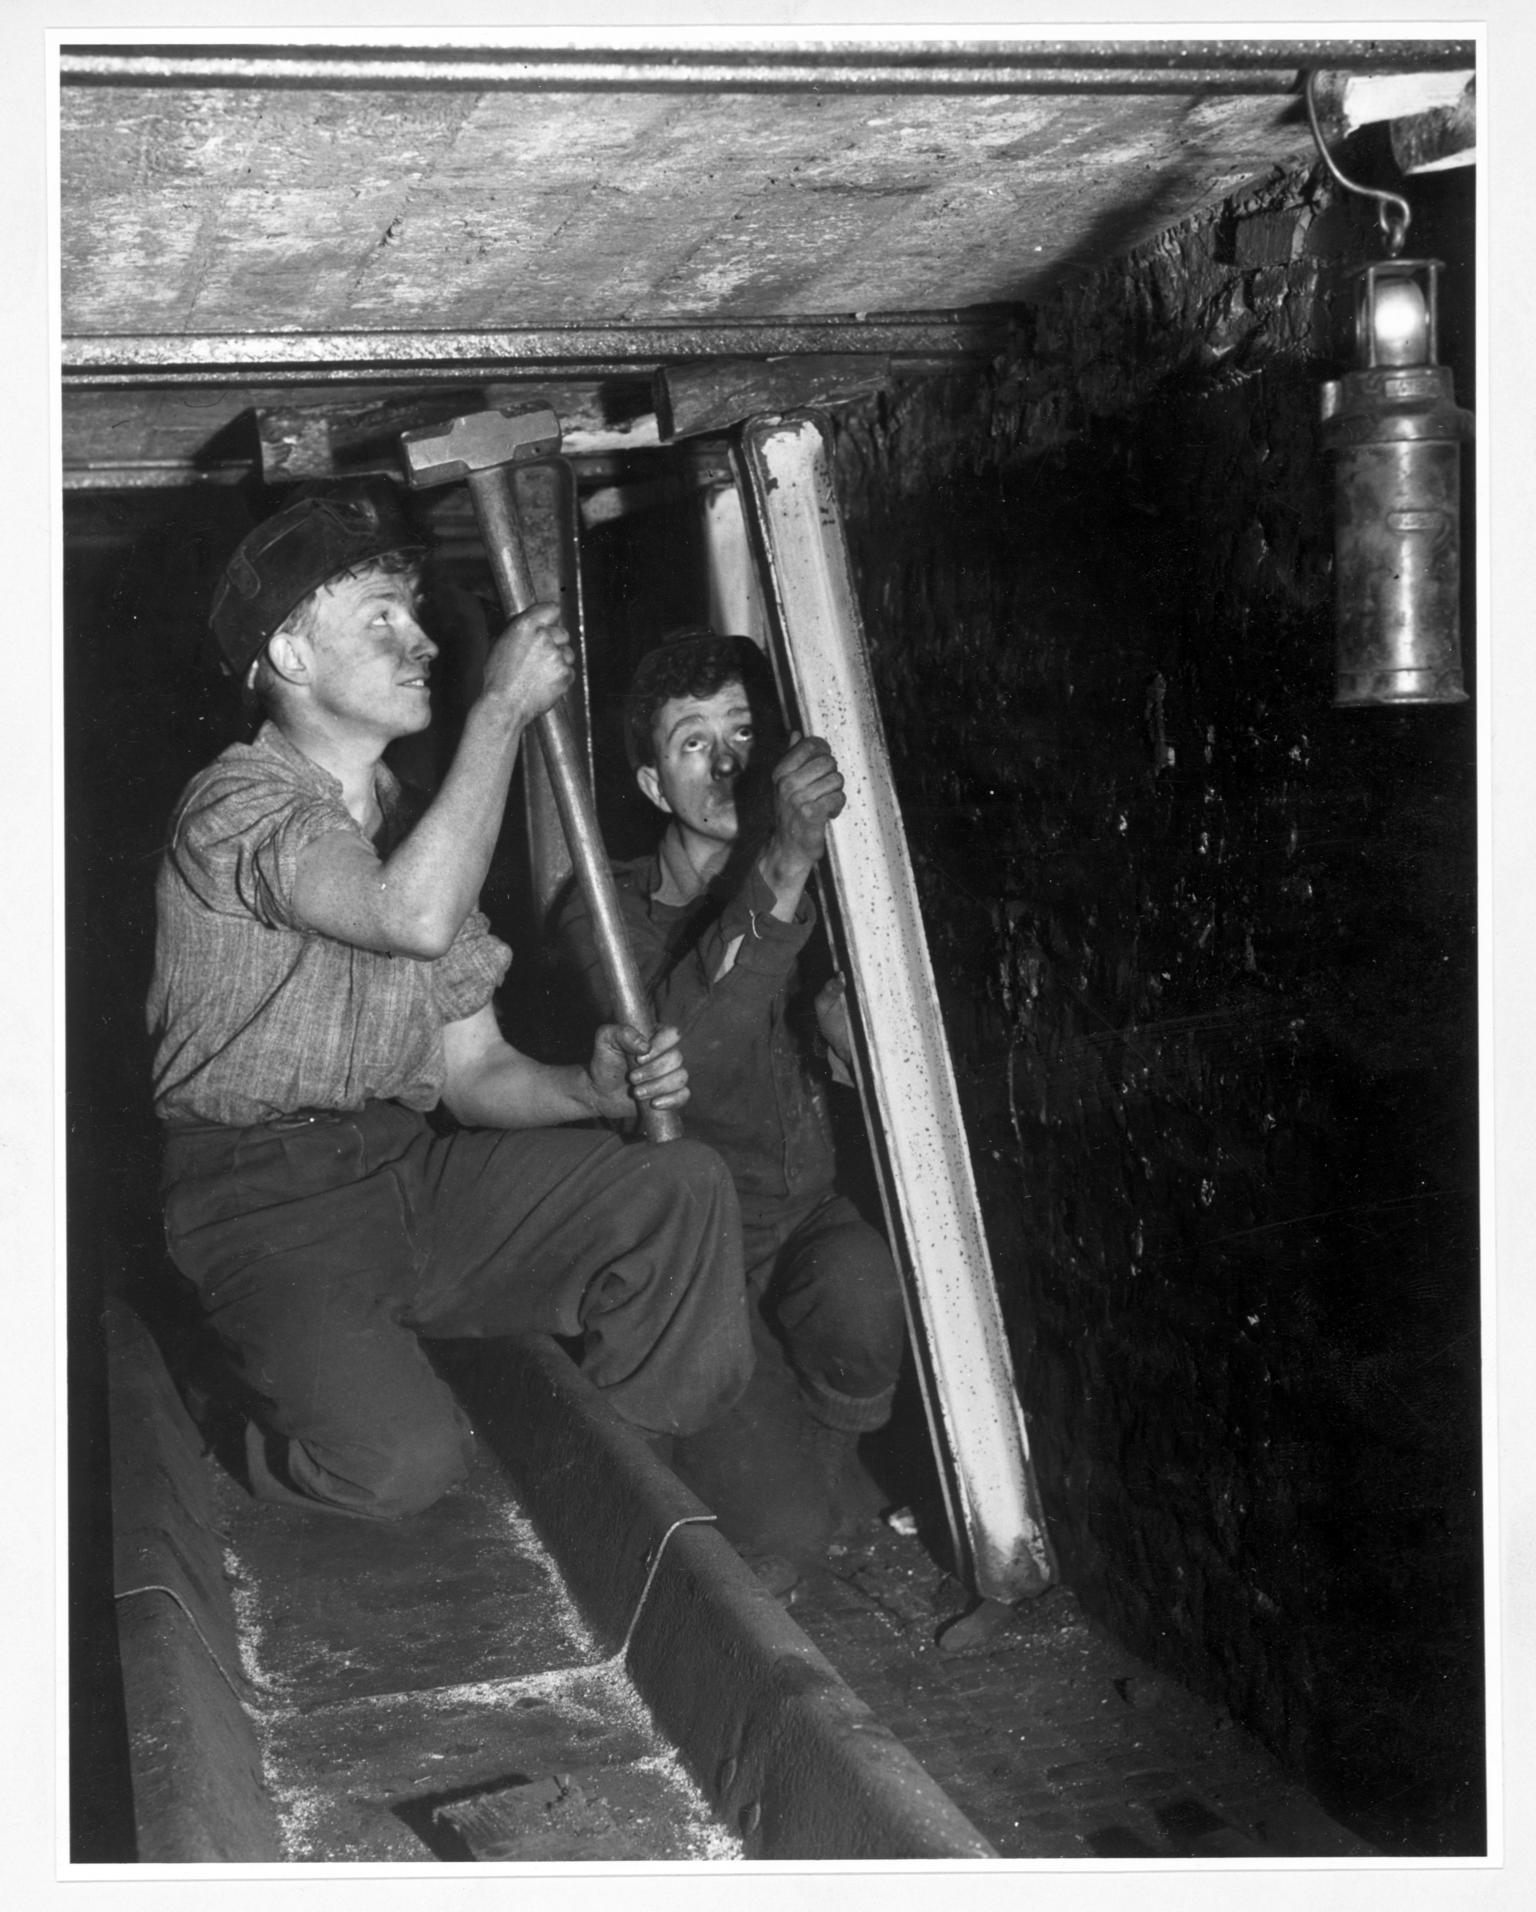 Trainees in coal industry, photograph